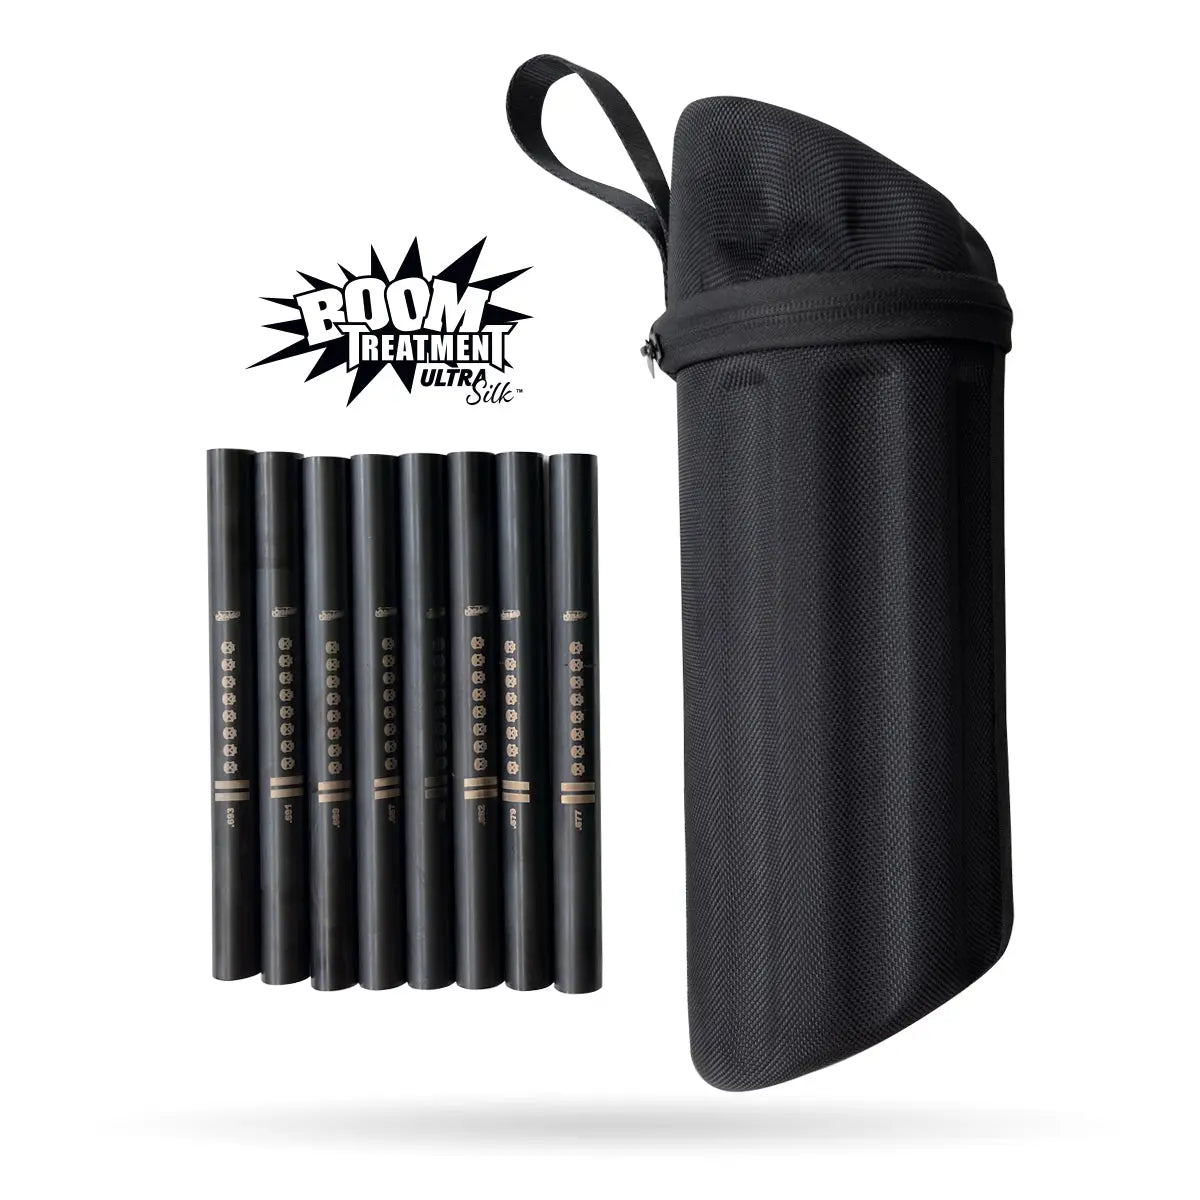 INFAMOUS X FREAK XL STAINLESS STEEL BOREMASTER INSERT KIT - BLACK NITRIDE WITH BOOM TREATMENT Infamous Paintball